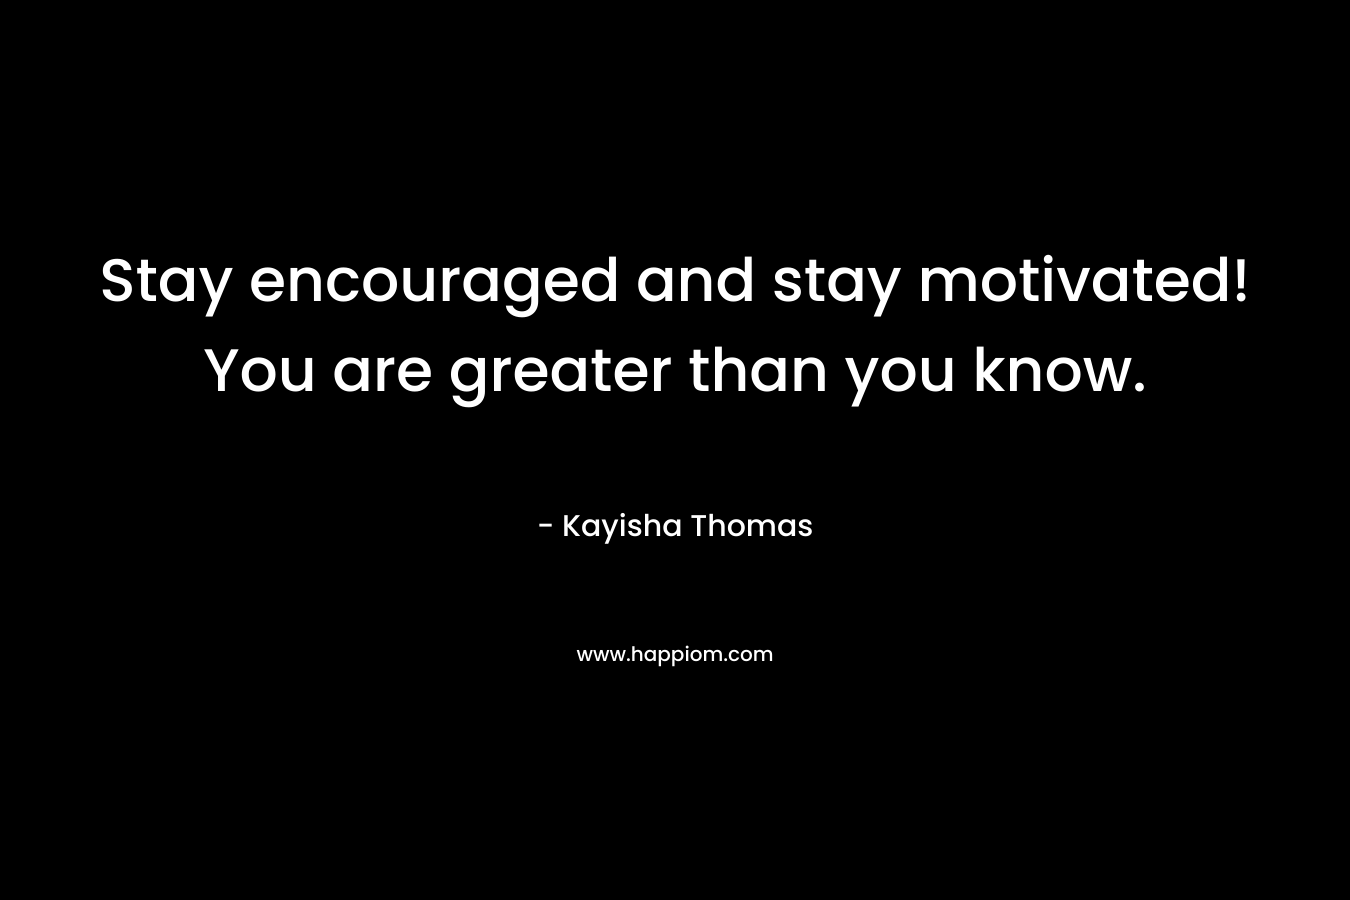 Stay encouraged and stay motivated! You are greater than you know.